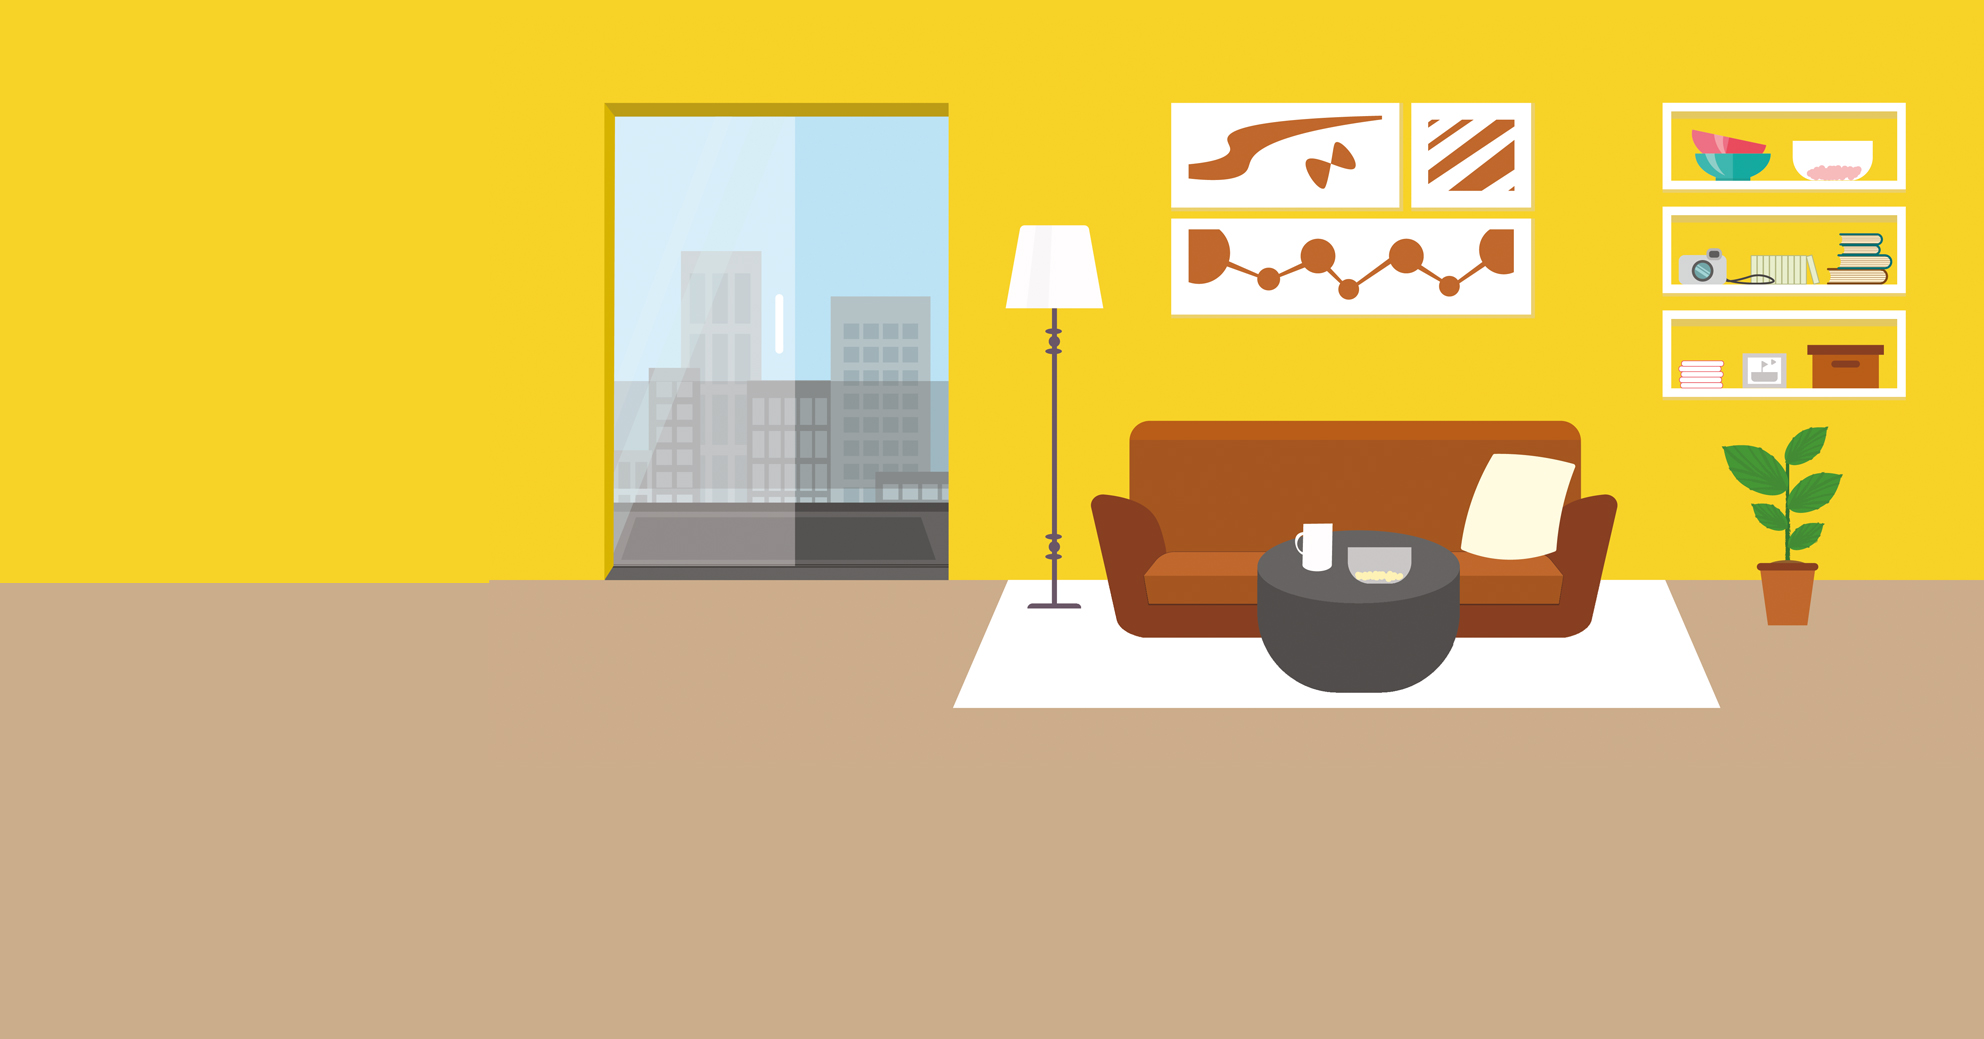 A picture of a flat with yellow walls, furniture and a city view that can be seen through a window. Is rent cheaper in the UK or in Dubai?